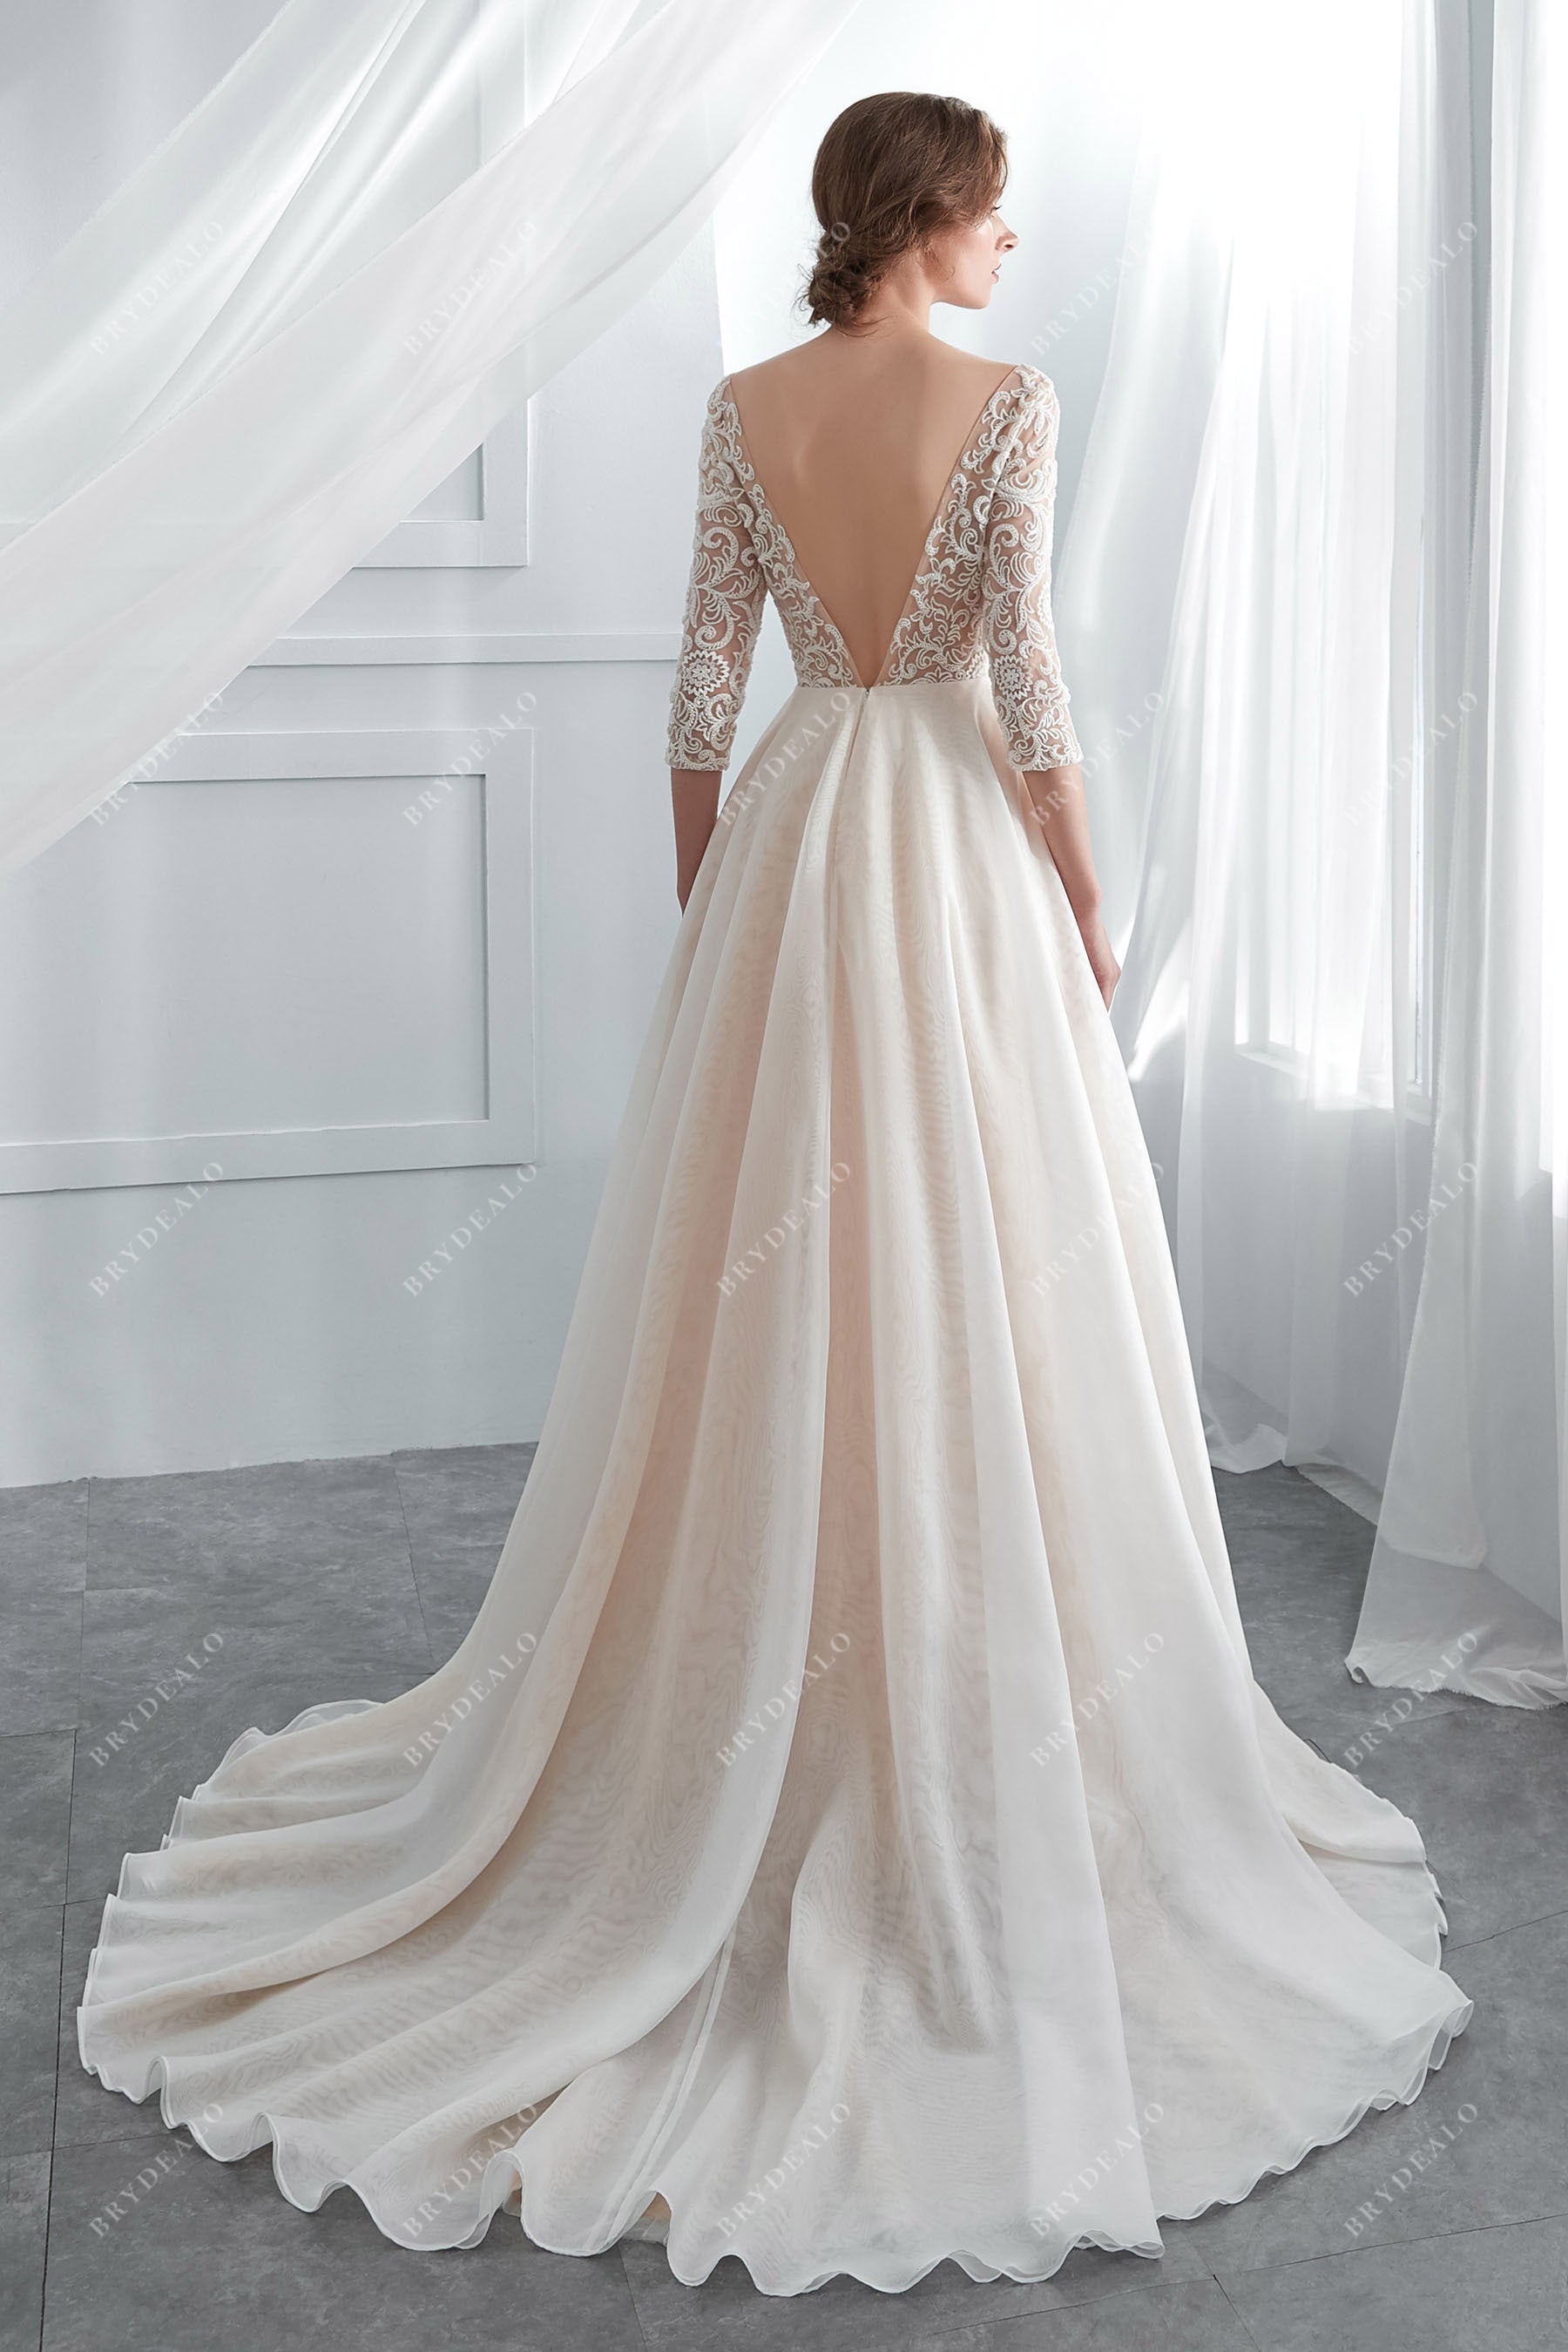 Champagne Illusion 3/4 Sleeve Lace Wedding Dress Online